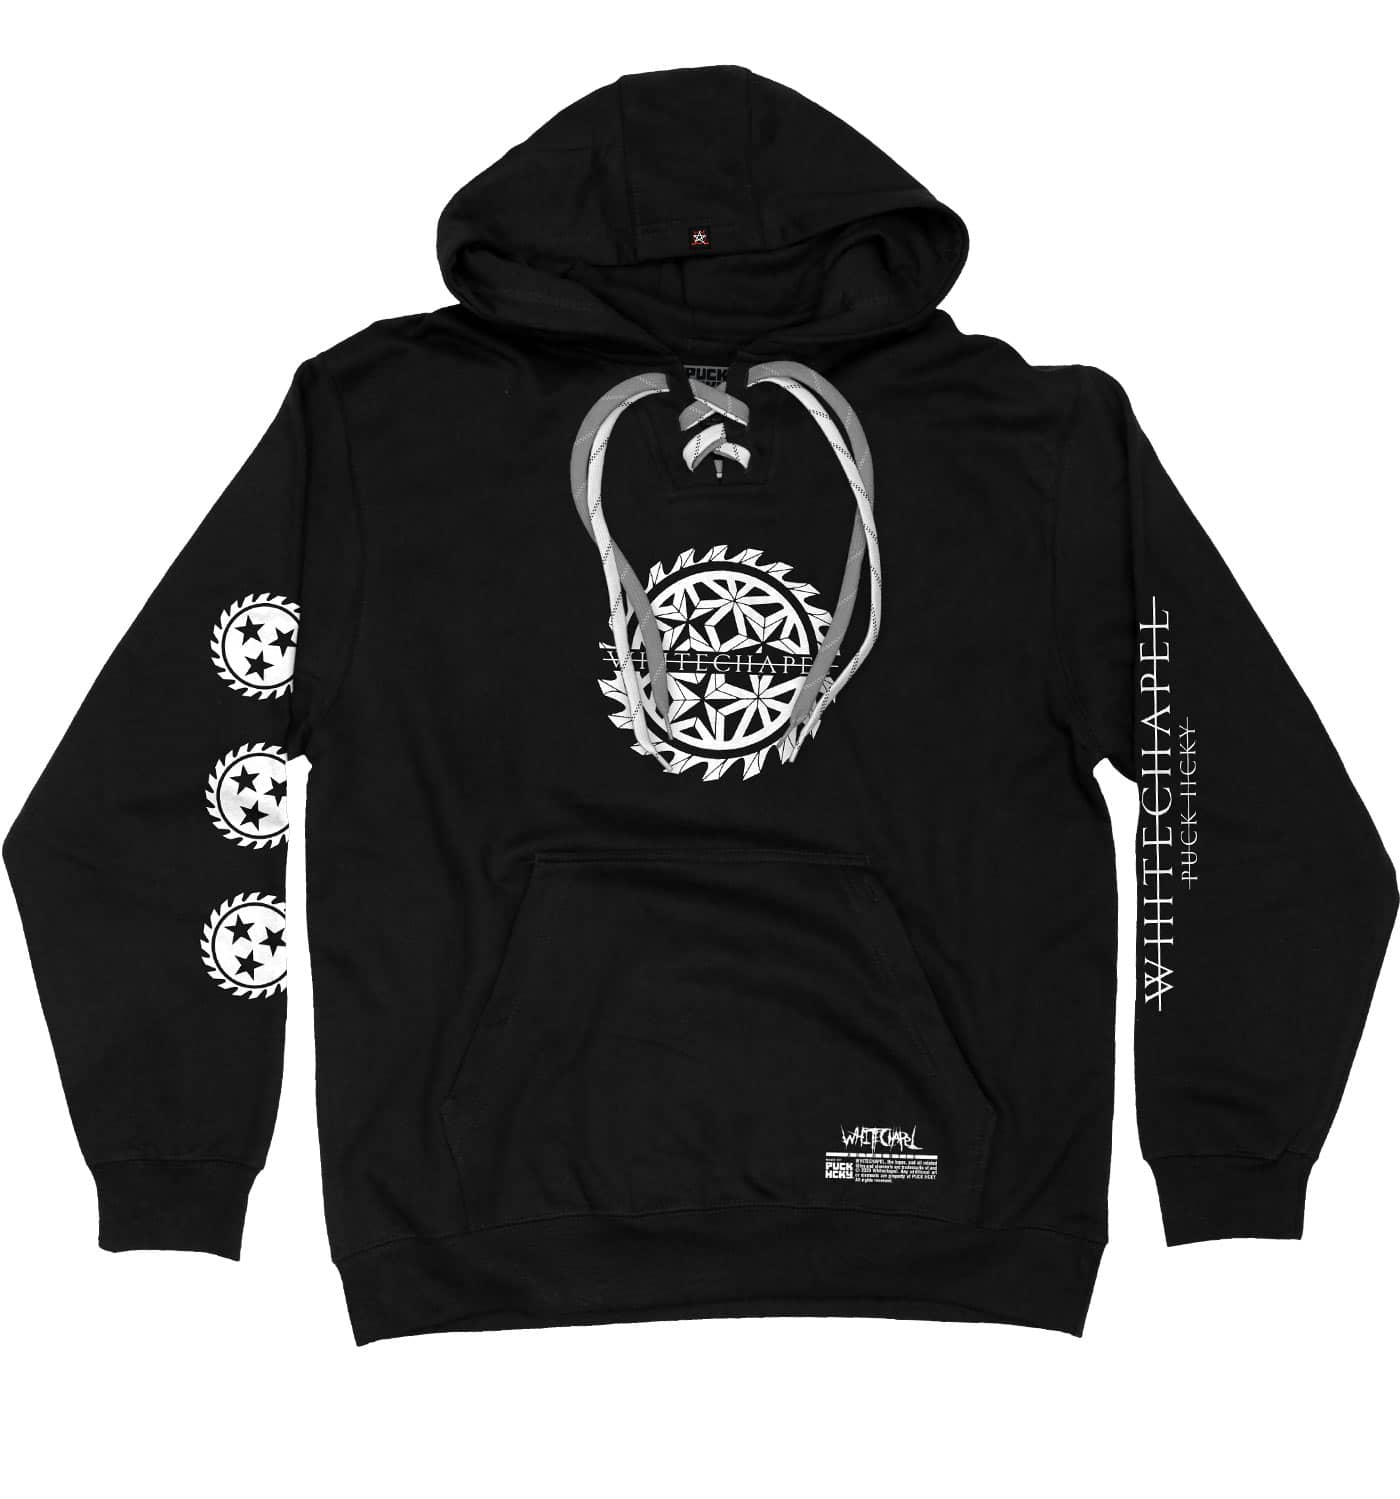 WHITECHAPEL 'MARK OF THE SKATE BLADE' laced pullover hockey hoodie in black with grey laces with white stripes and white laces with black stripes front view